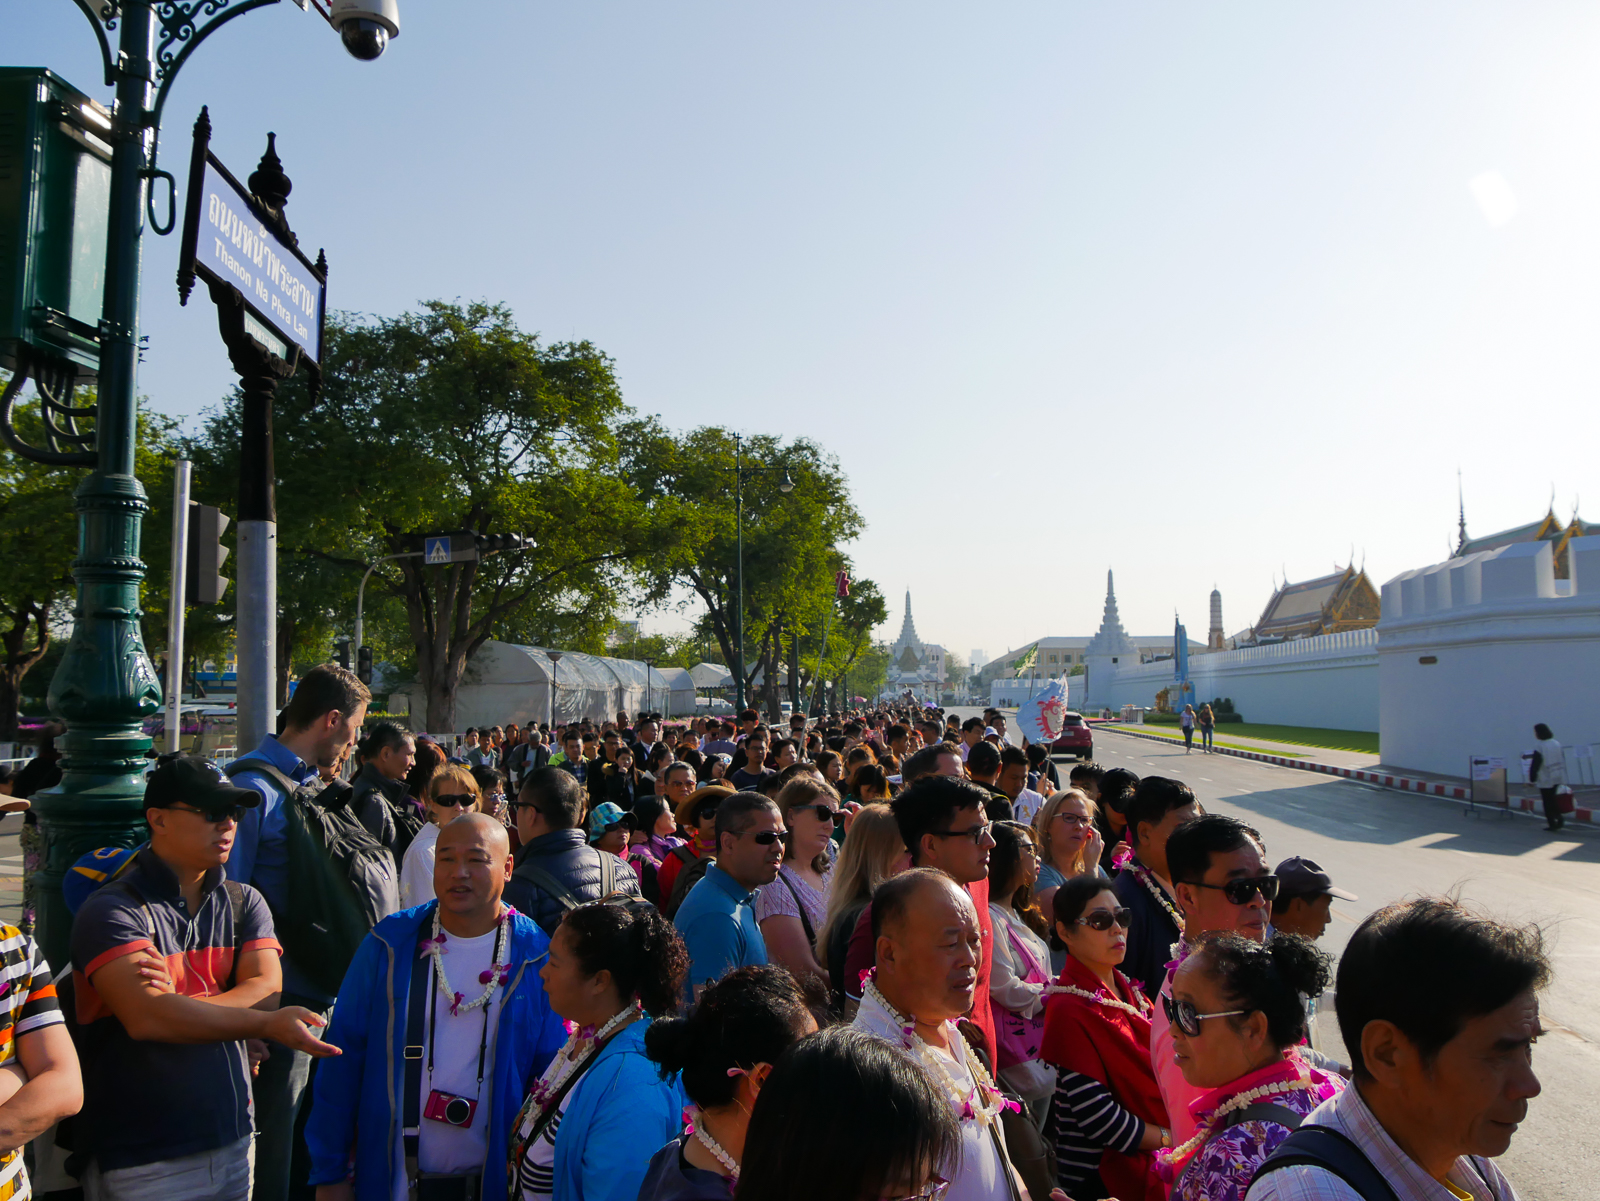 Crowds waiting for opening of Grand Palace in Bangkok